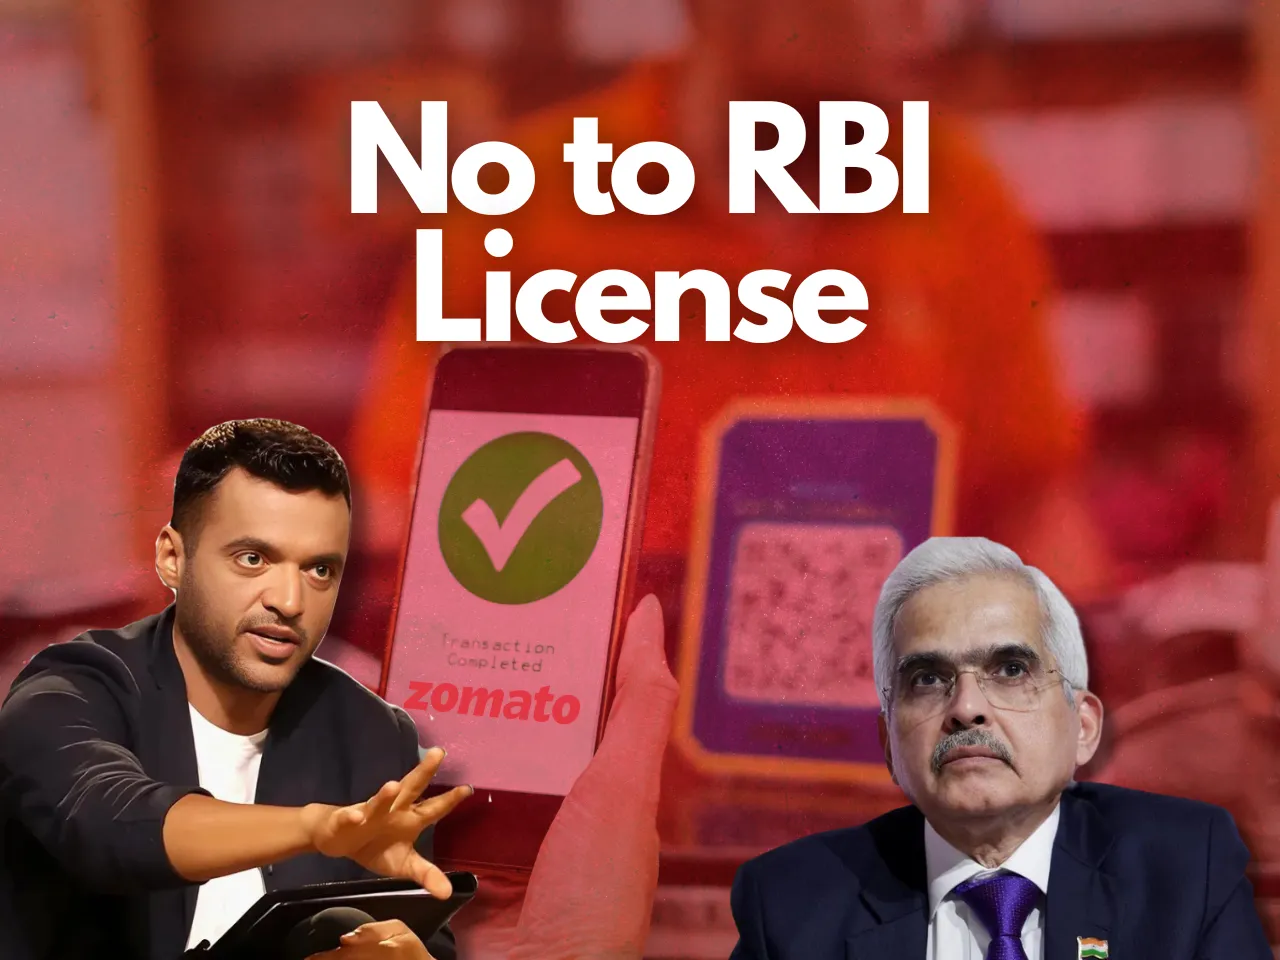 Zomato Says No To RBI License, What It Means for the Food Tech Giant?